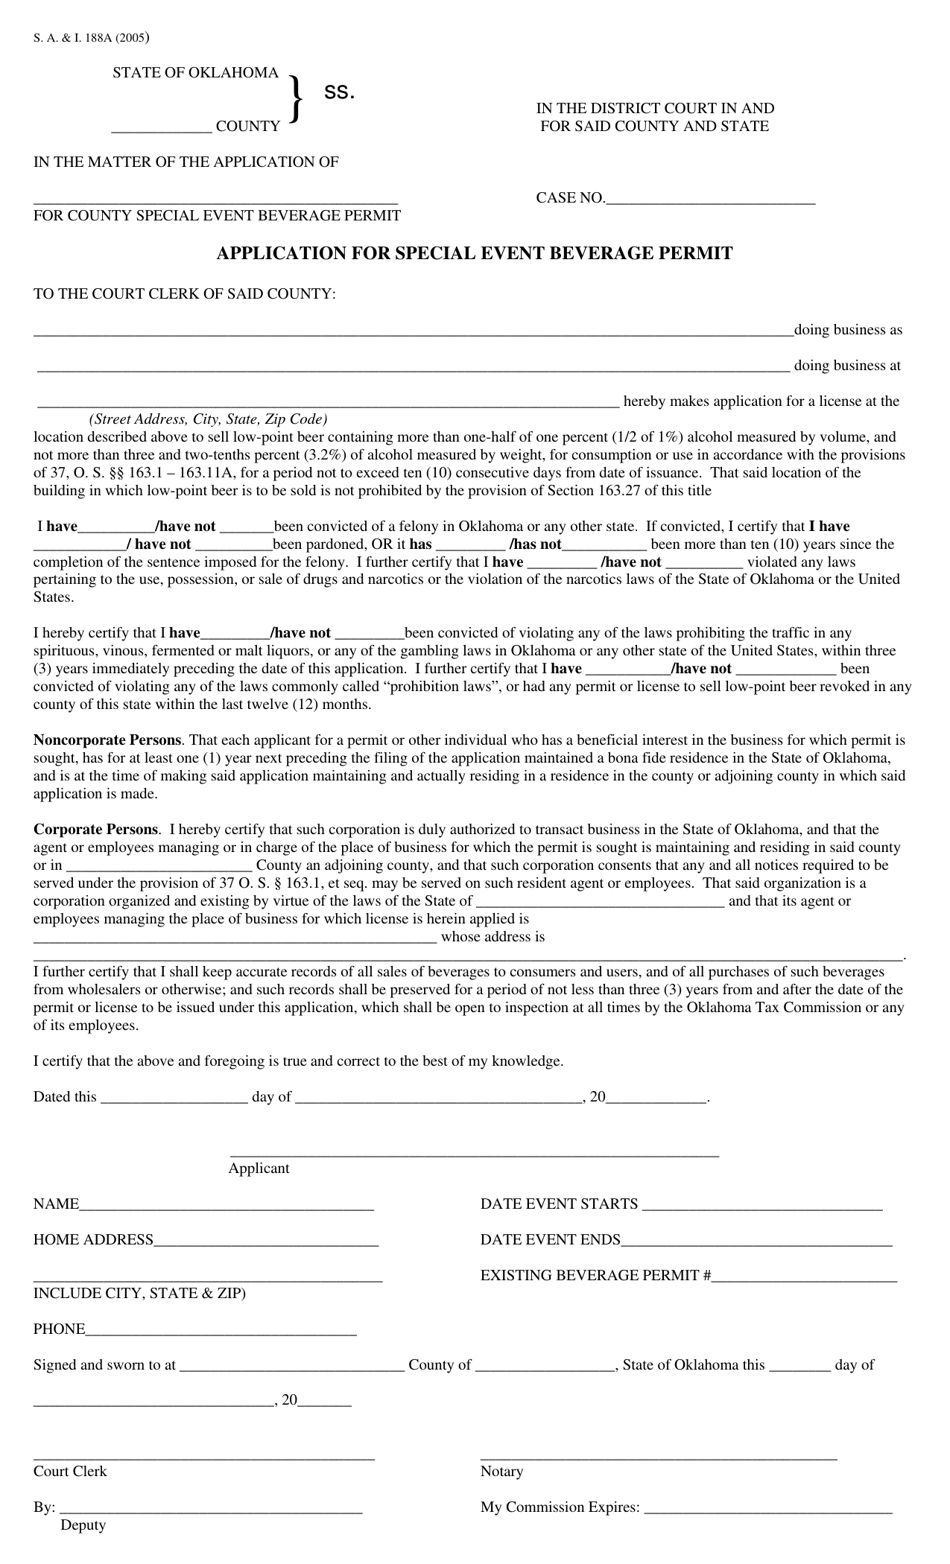 Form S.A. I.188A Application for Special Event Beverage Permit - Oklahoma, Page 1